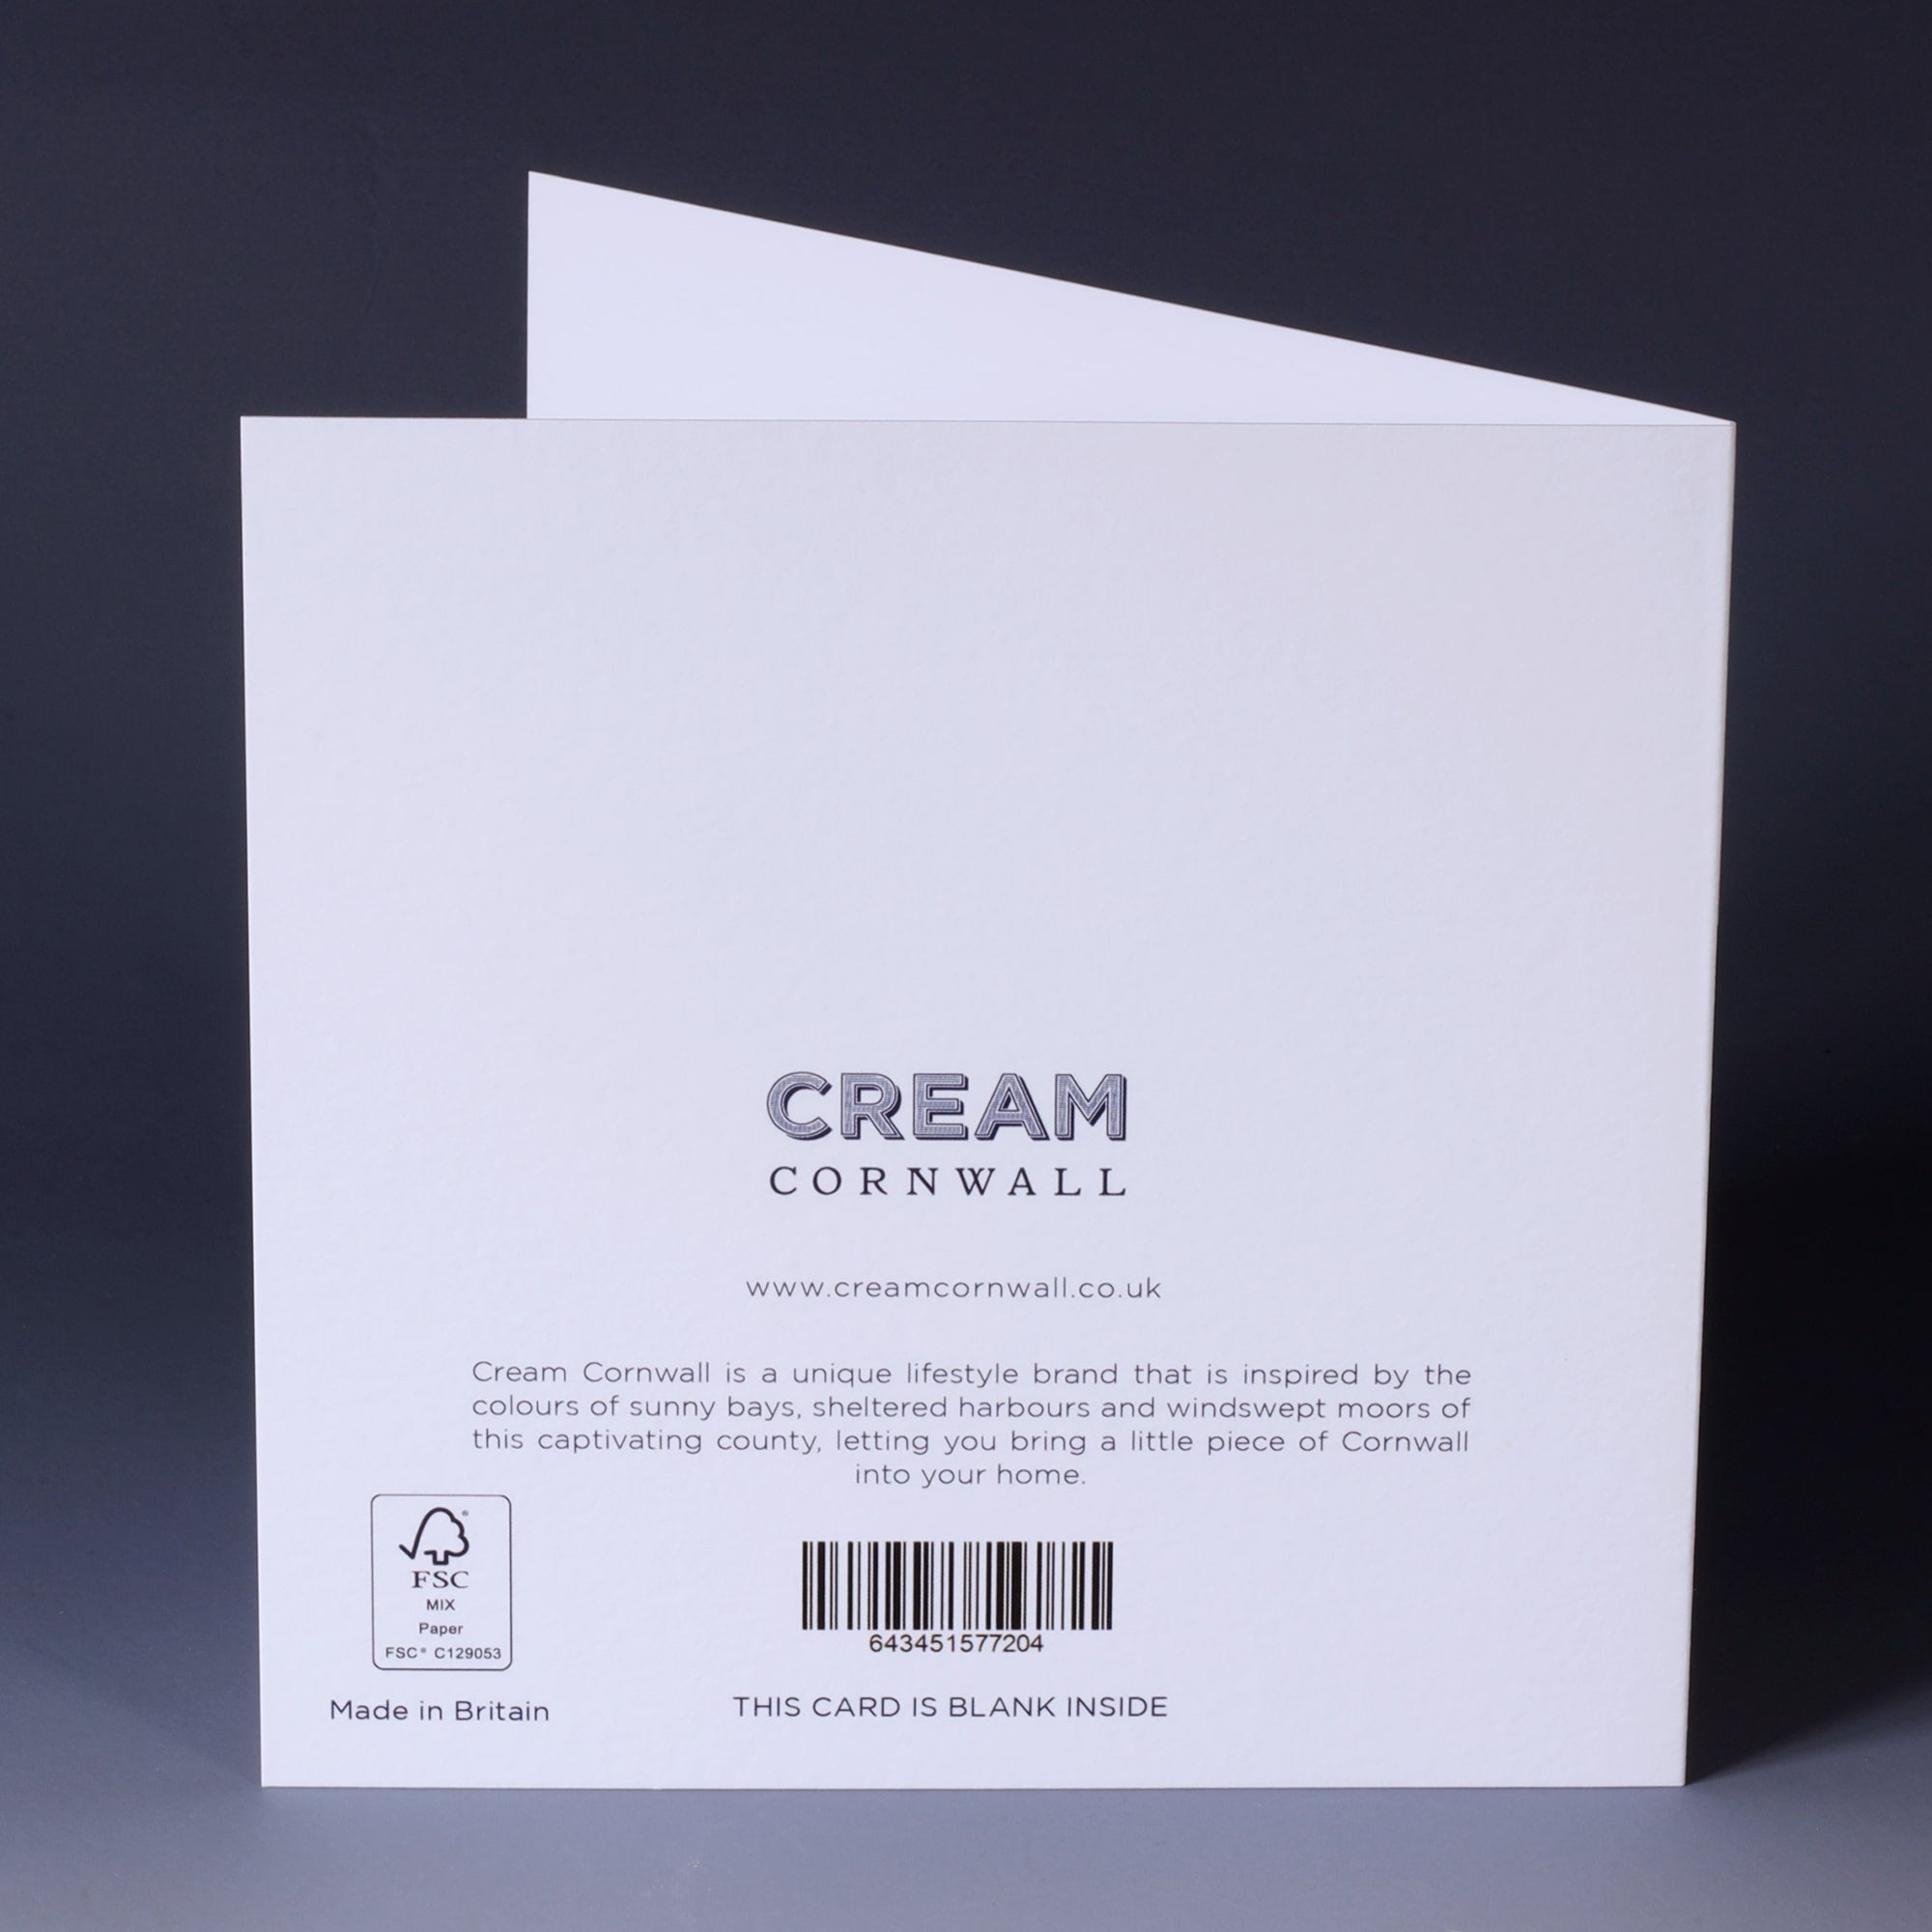 back of greeting card with logo and description about cream cornwall